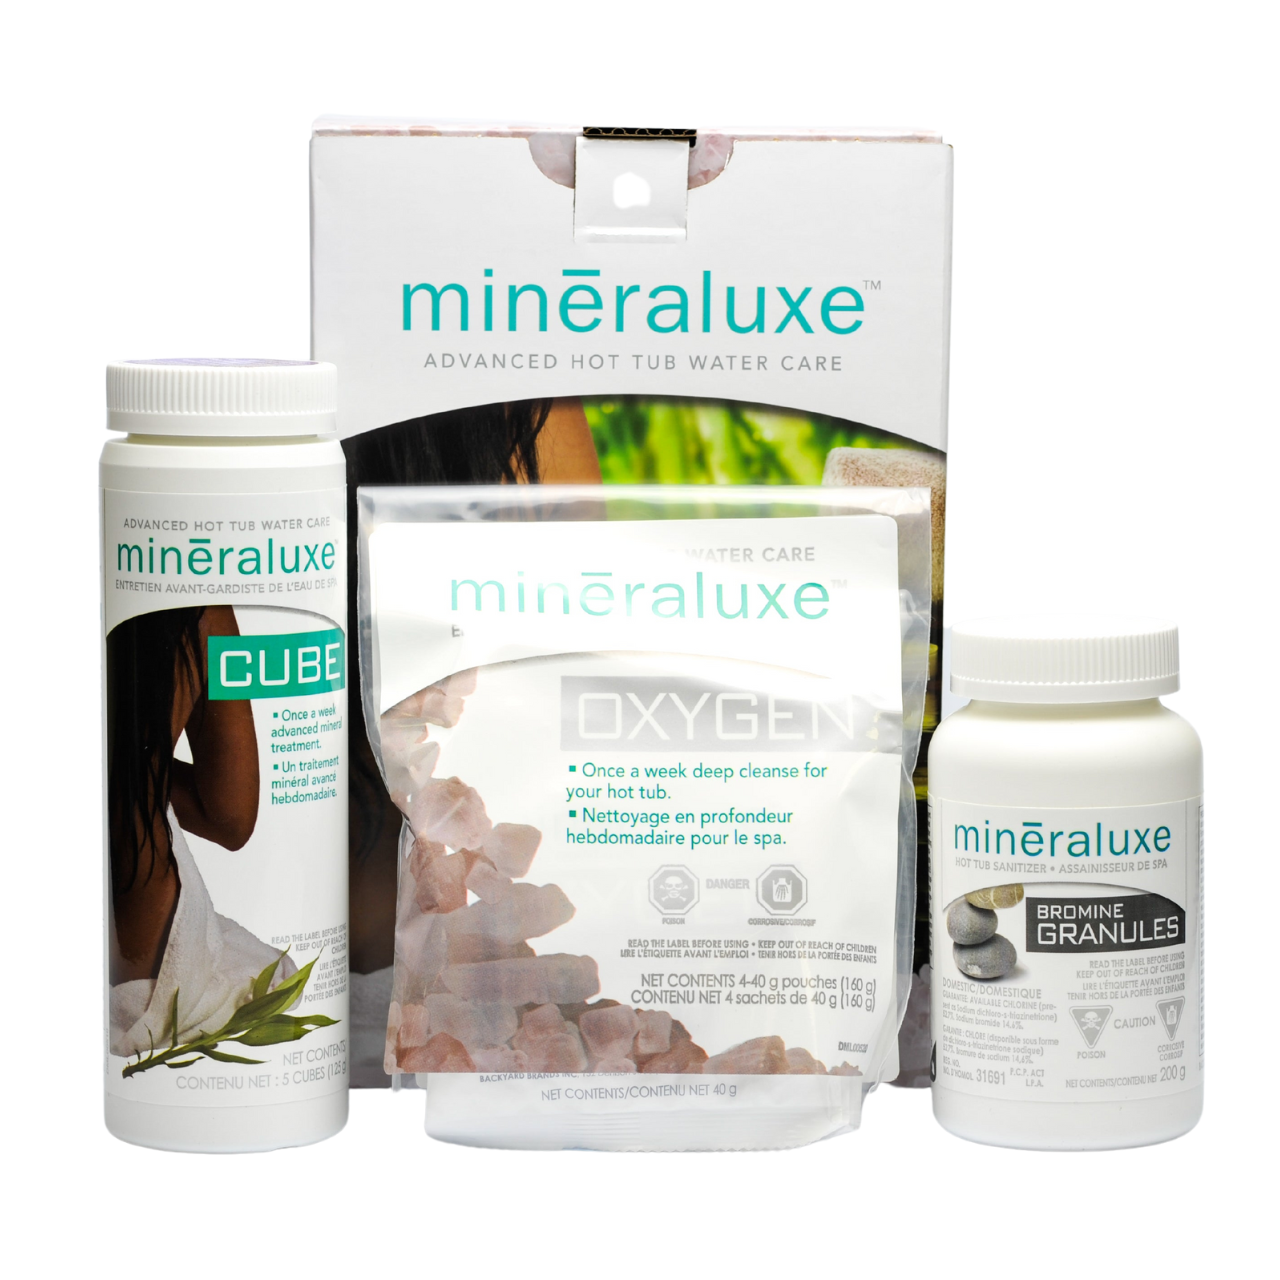 Mineraluxe™ 1 Month Bromine Granules Mineraluxe System